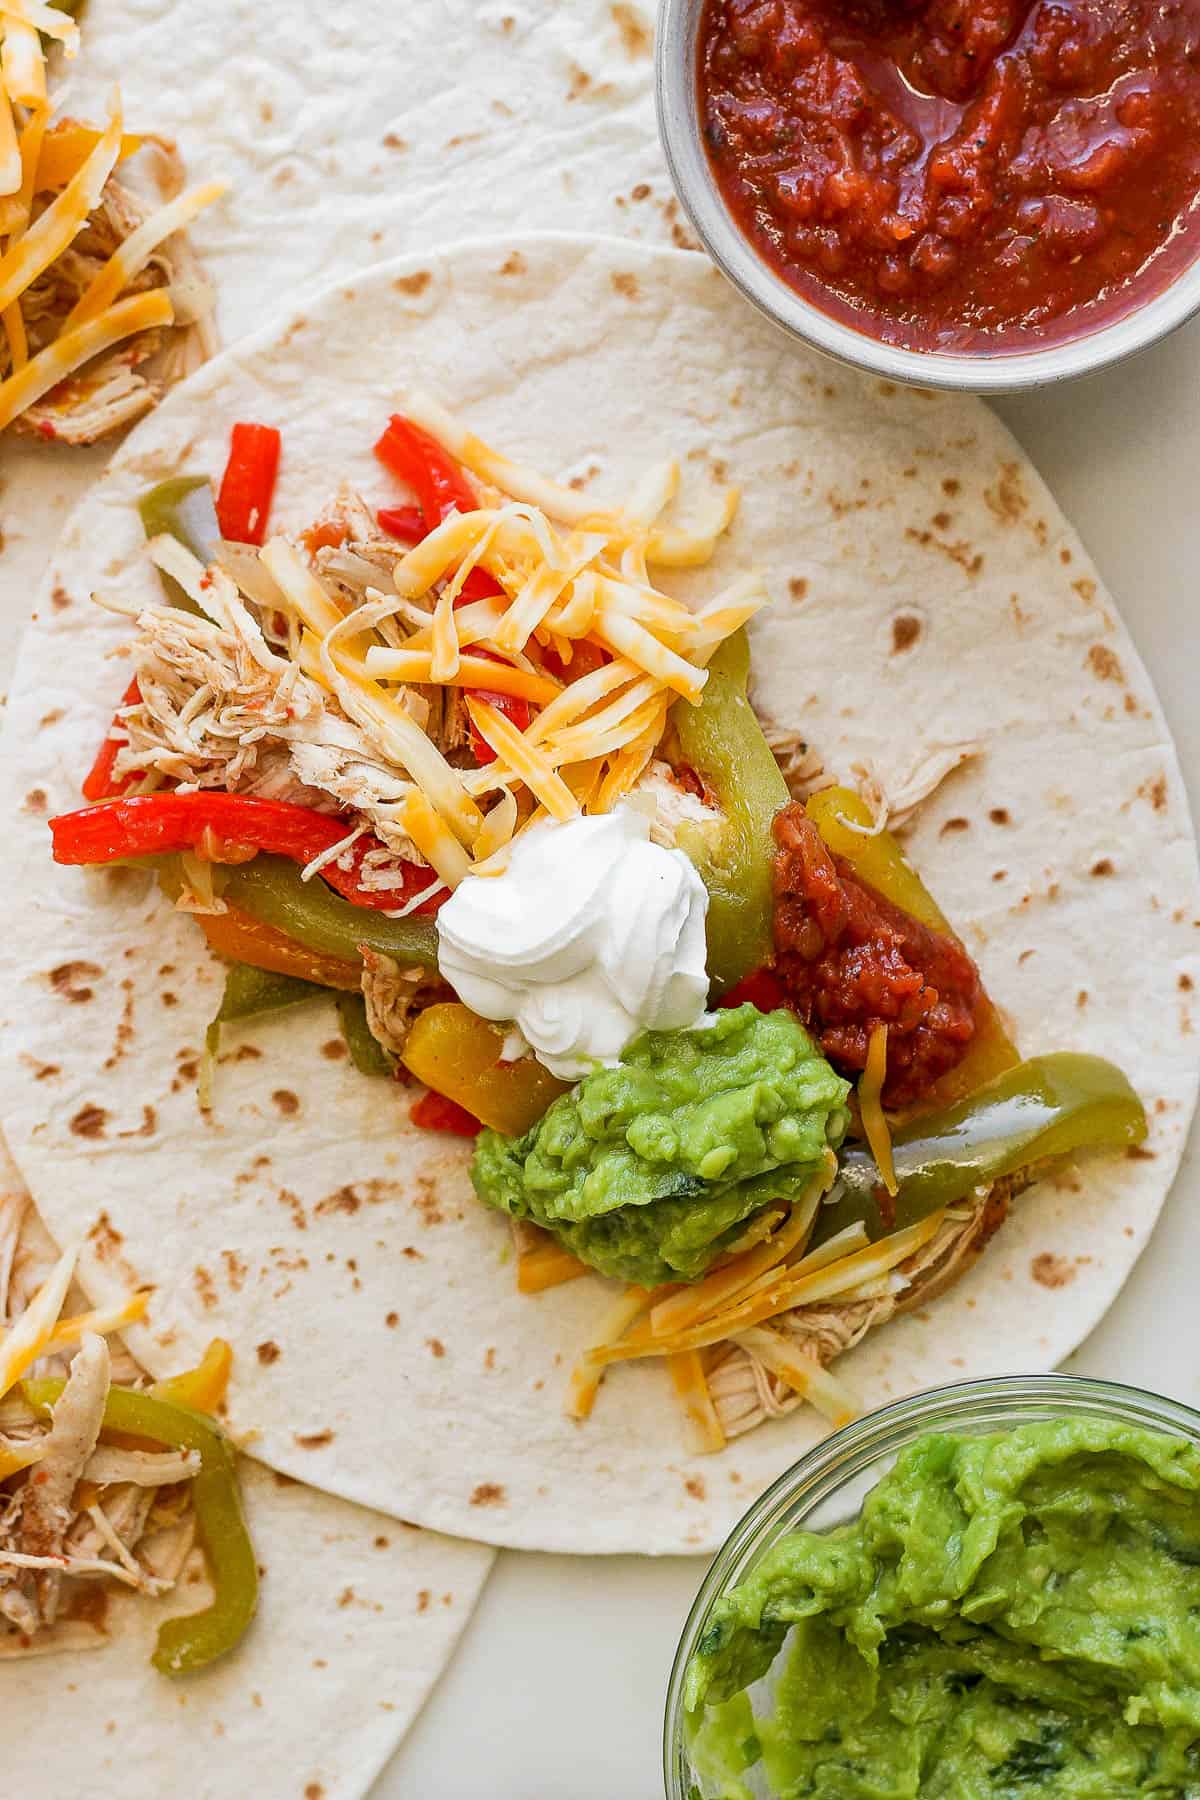 Crockpot chicken fajitas on flour tortillas topped with shredded cheese, guacamole, sour cream, and chunky red salsa.